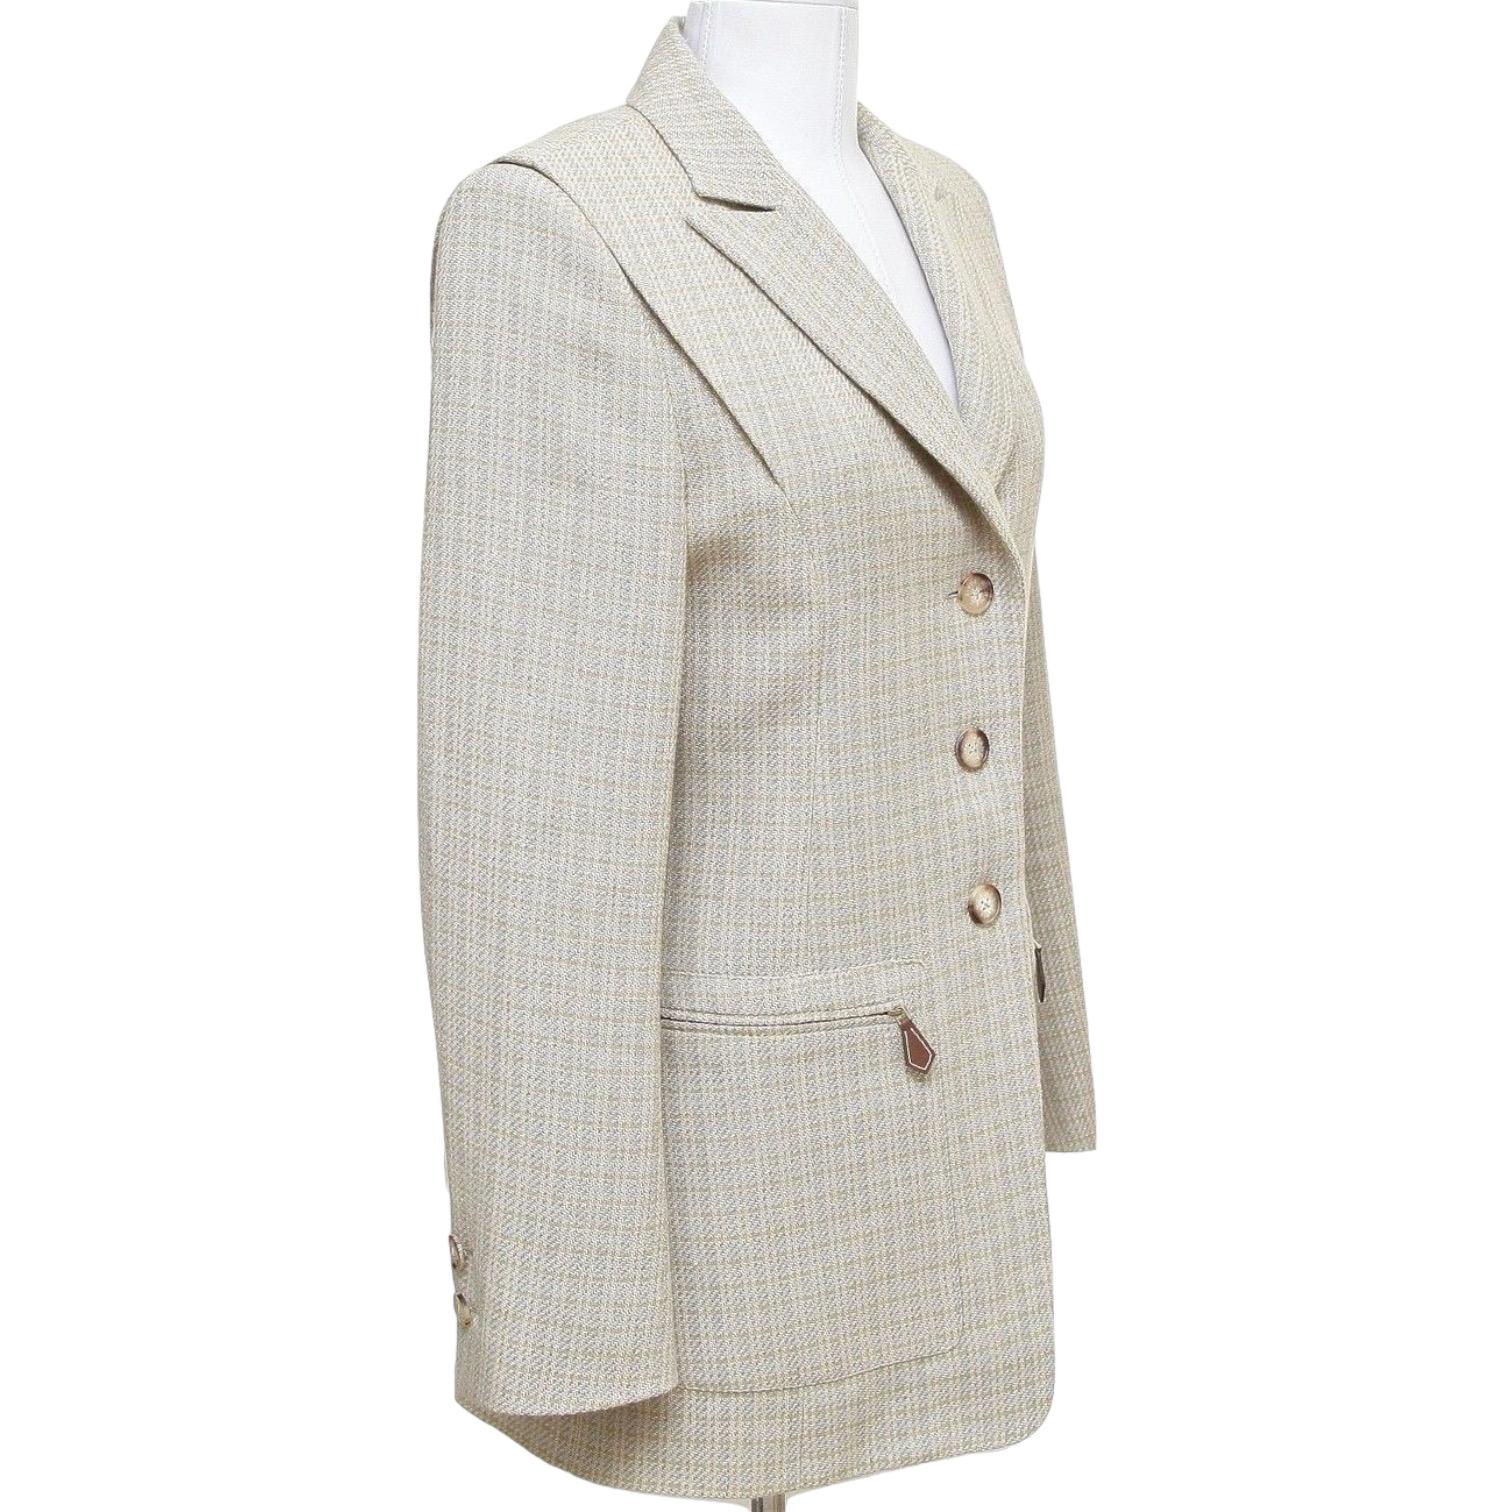 GUARANTEED AUTHENTIC VINTAGE HERMES LINEN WOOL BLAZER Collector's Piece!

Size: 38

Material: 65% Linen, 35% Wool, Silk Lining

Design:
- Single breasted 3 button elegant fit jacket.
- Beautiful in a very light green and yellow.
- 2 zip pockets on